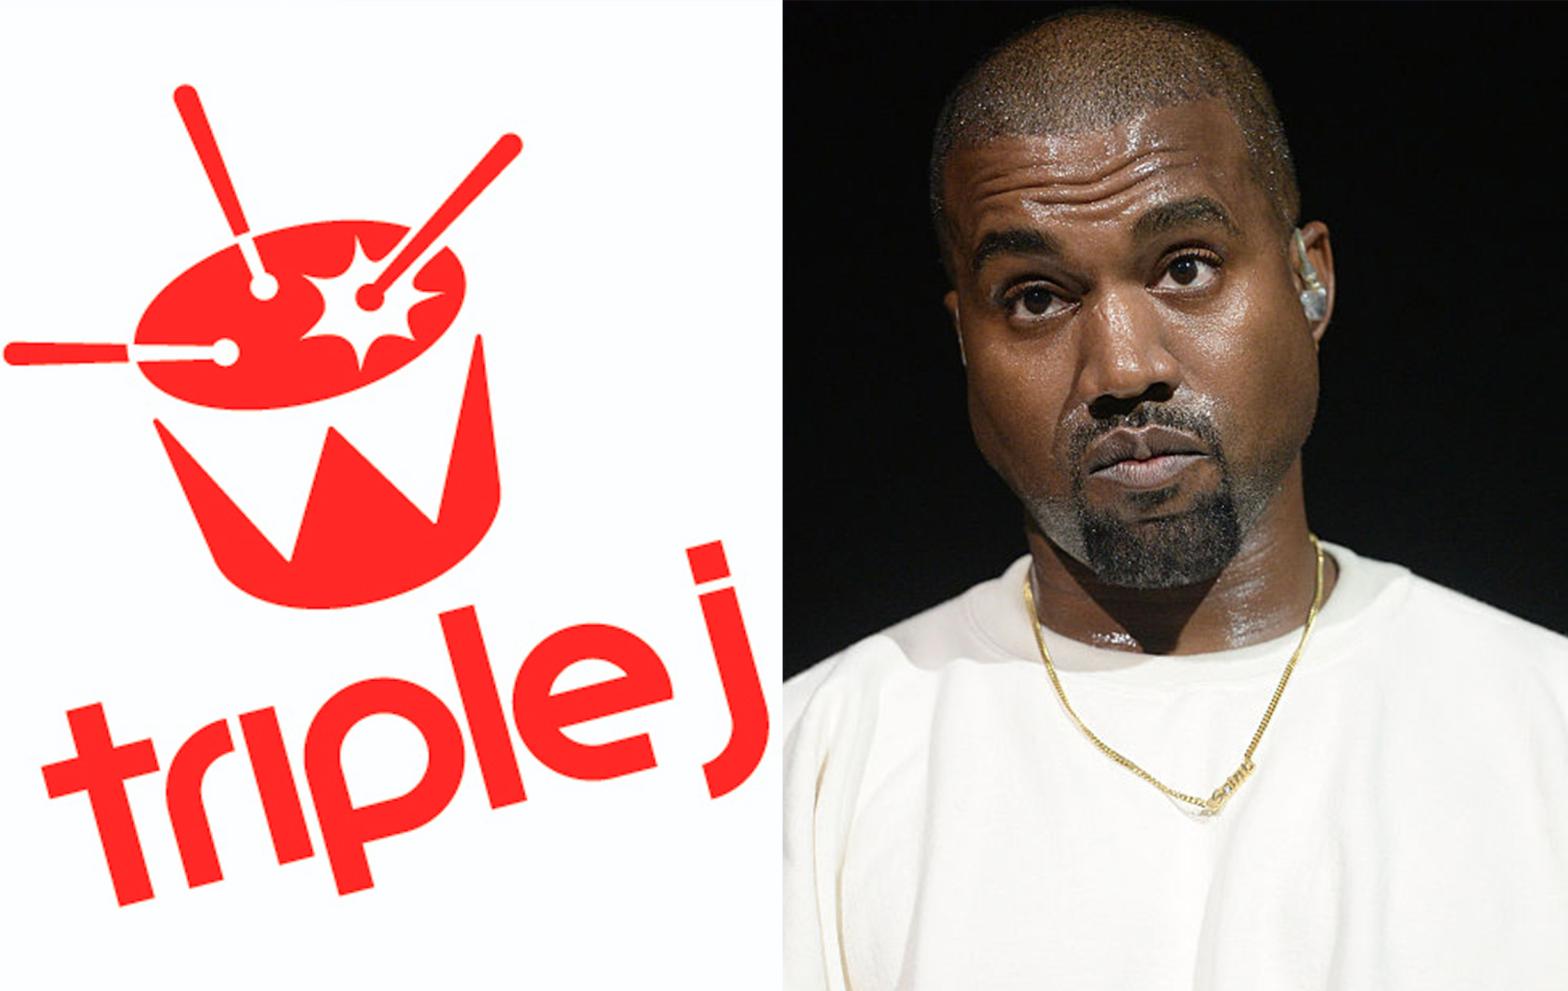 A photograph of Kanye West and the triple j logo, who was temporarily banned from Twitter for posting about his Yeezus song